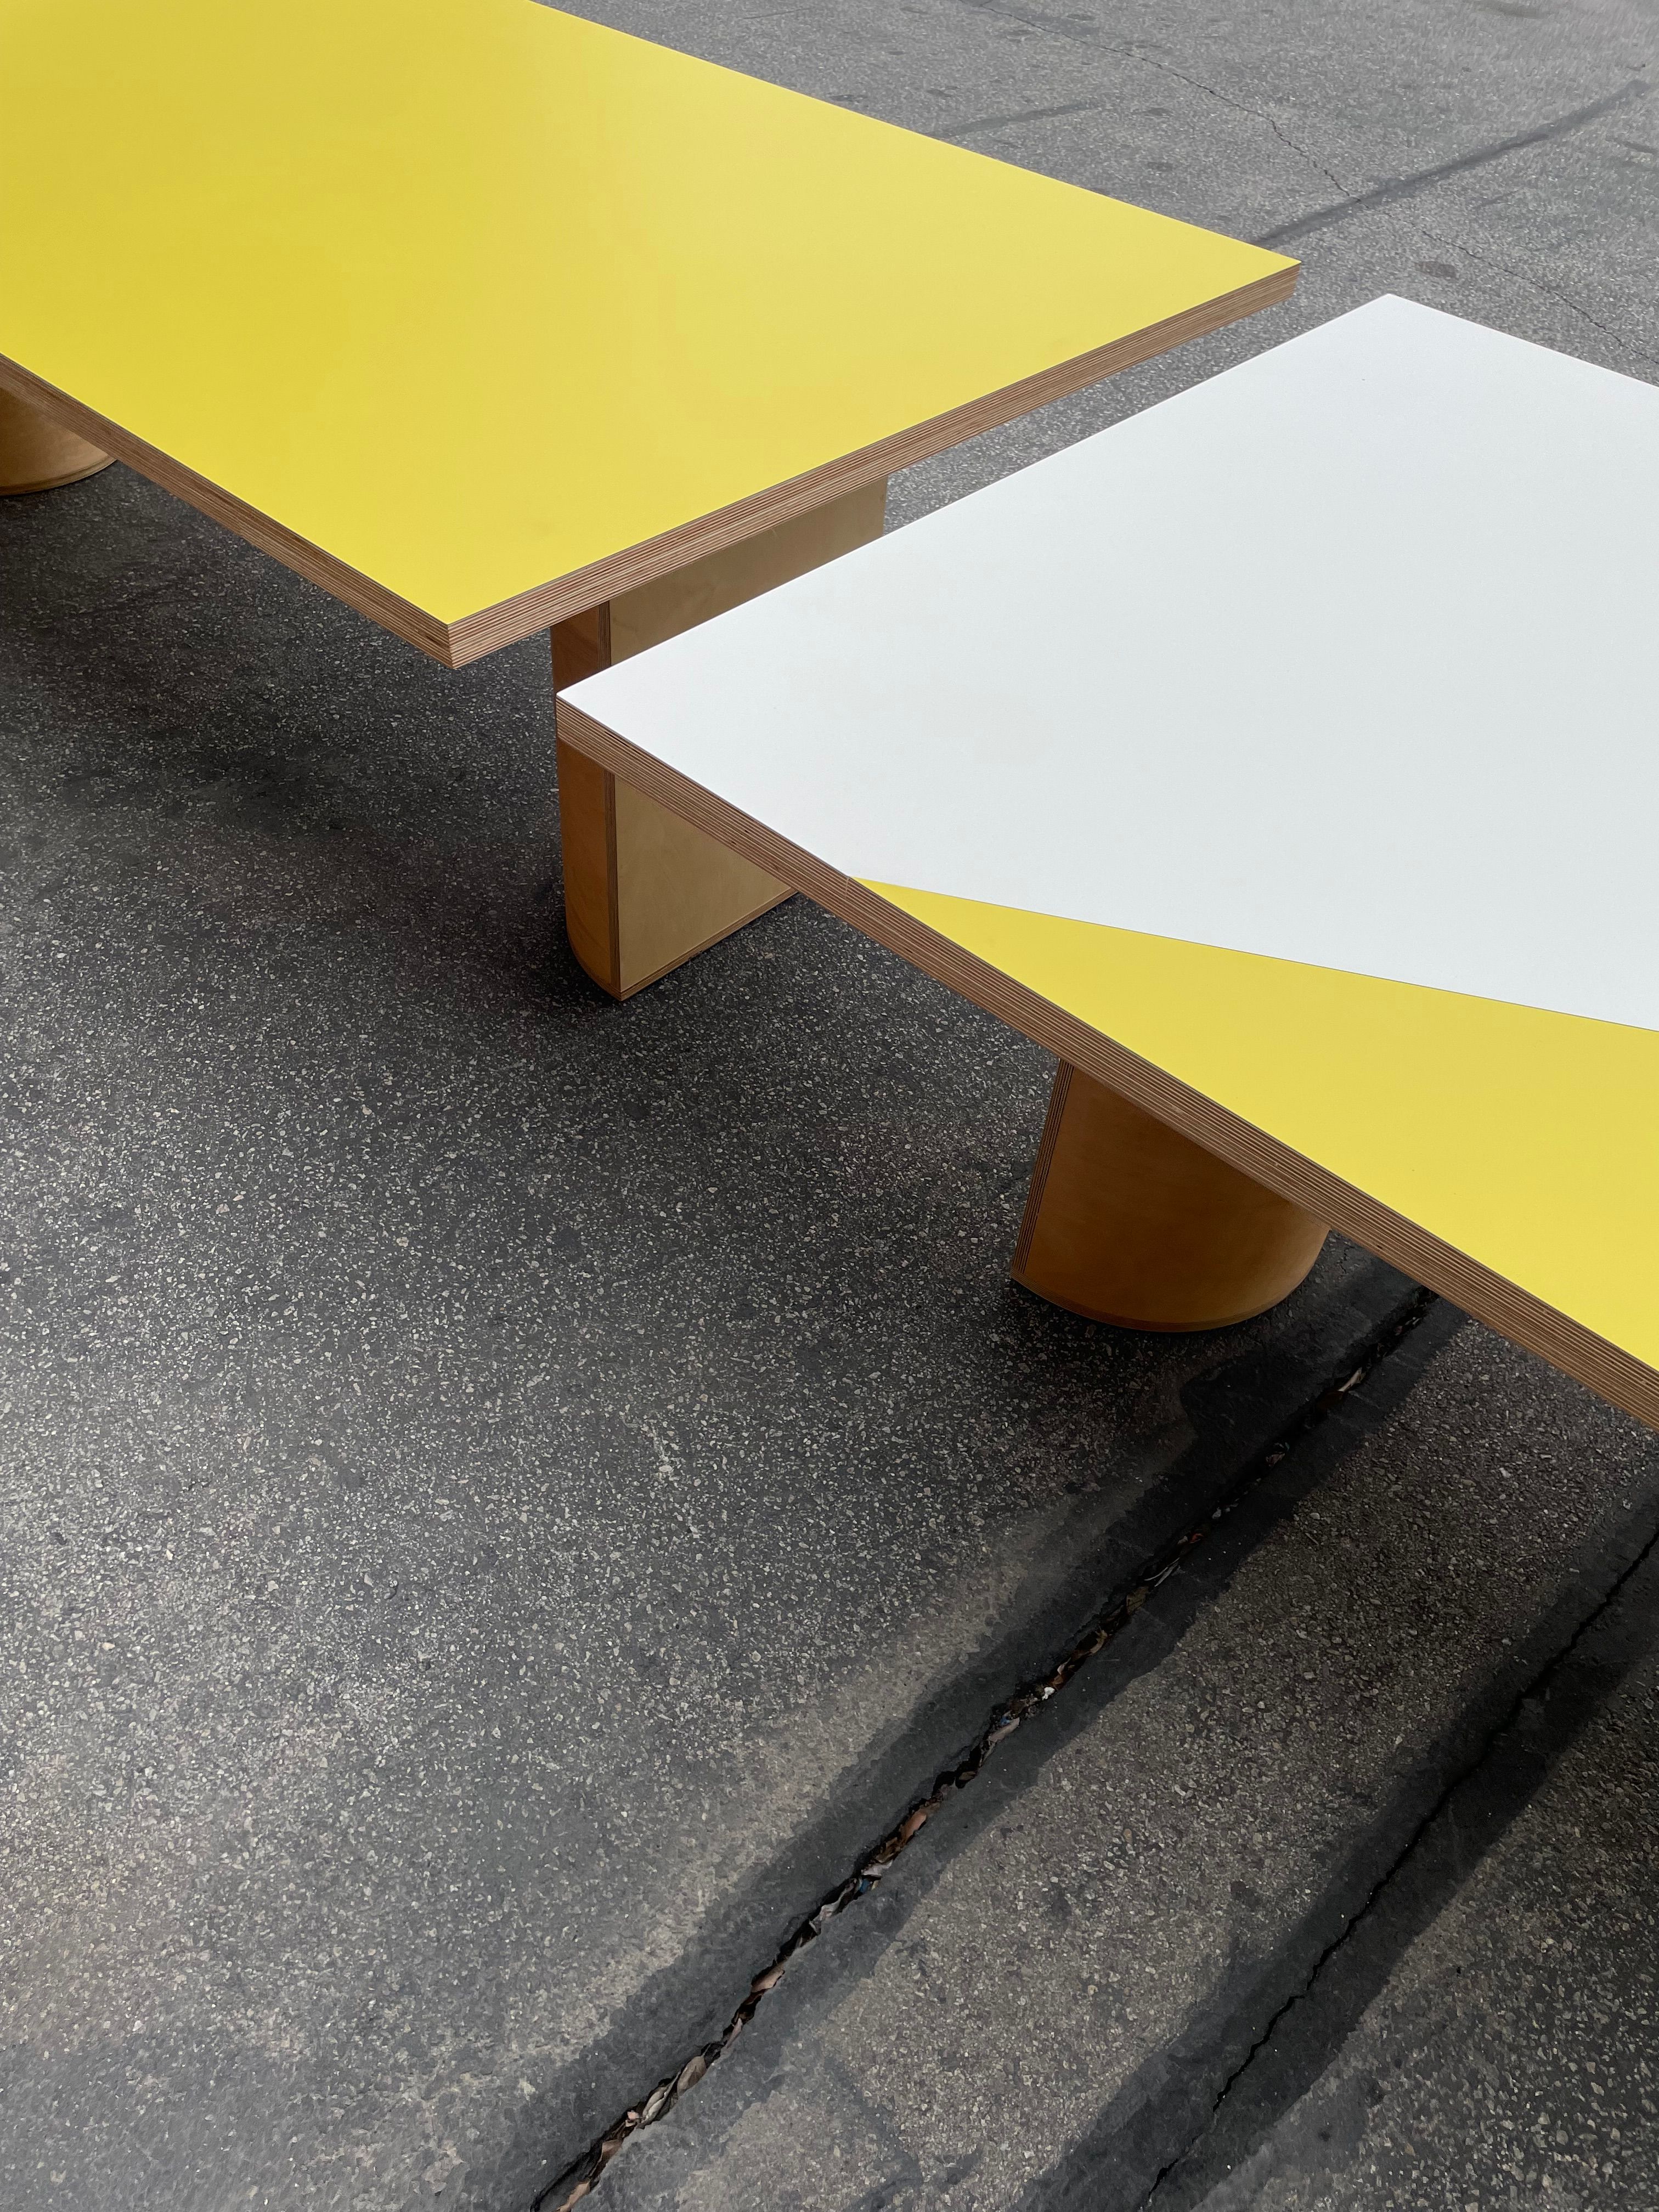  Two Tone Community Tables product image 5